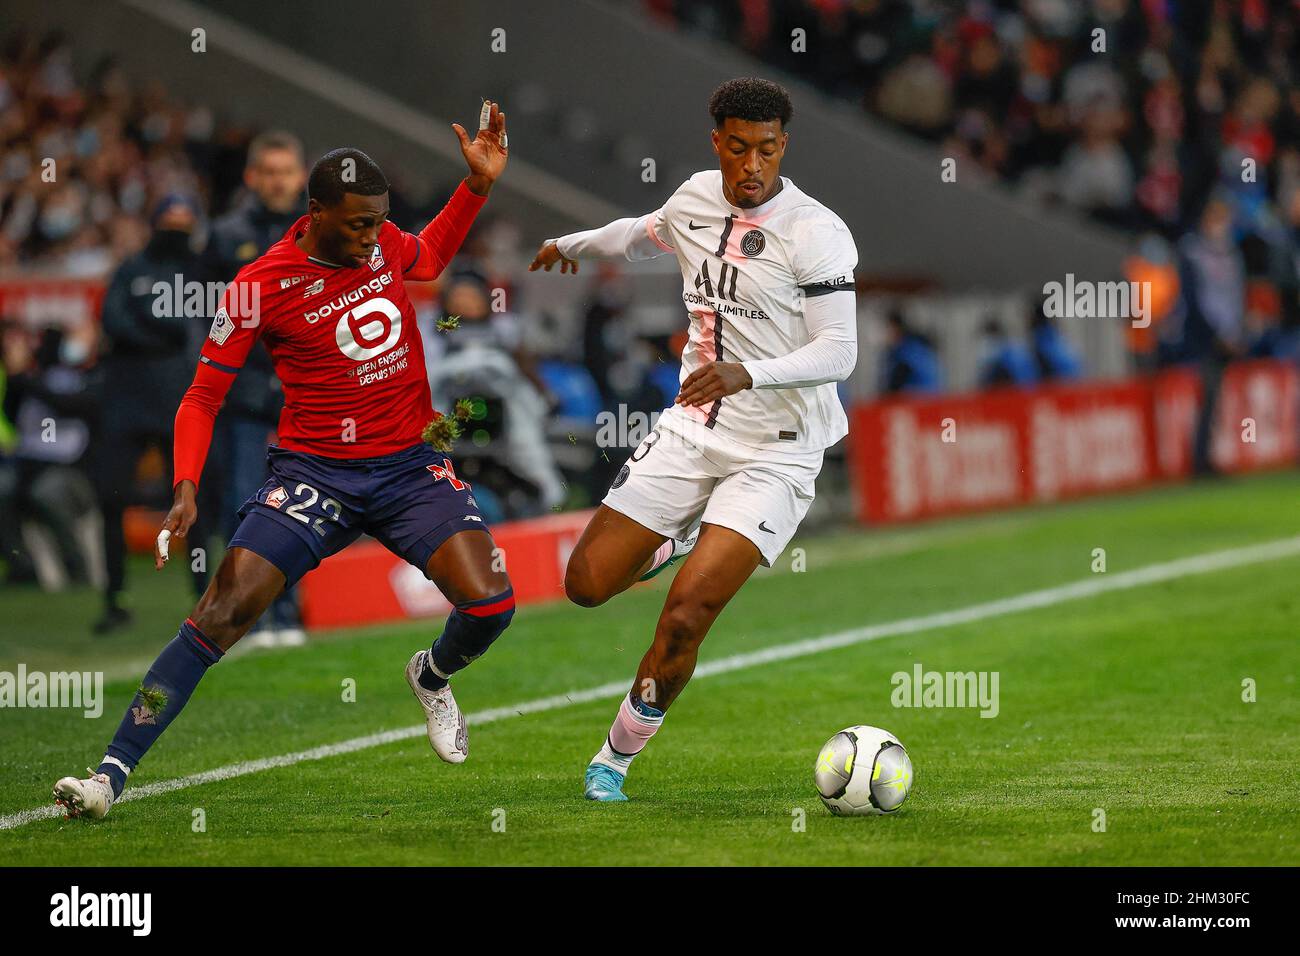 Presnel KIMPEMBE of PSG In action during the Ligue 1 LOSC Lille v Paris  Saint-Germain (PSG) football match at Pierre Mauroy stadium on February 6,  2022 in Lille France. Photo by Loic